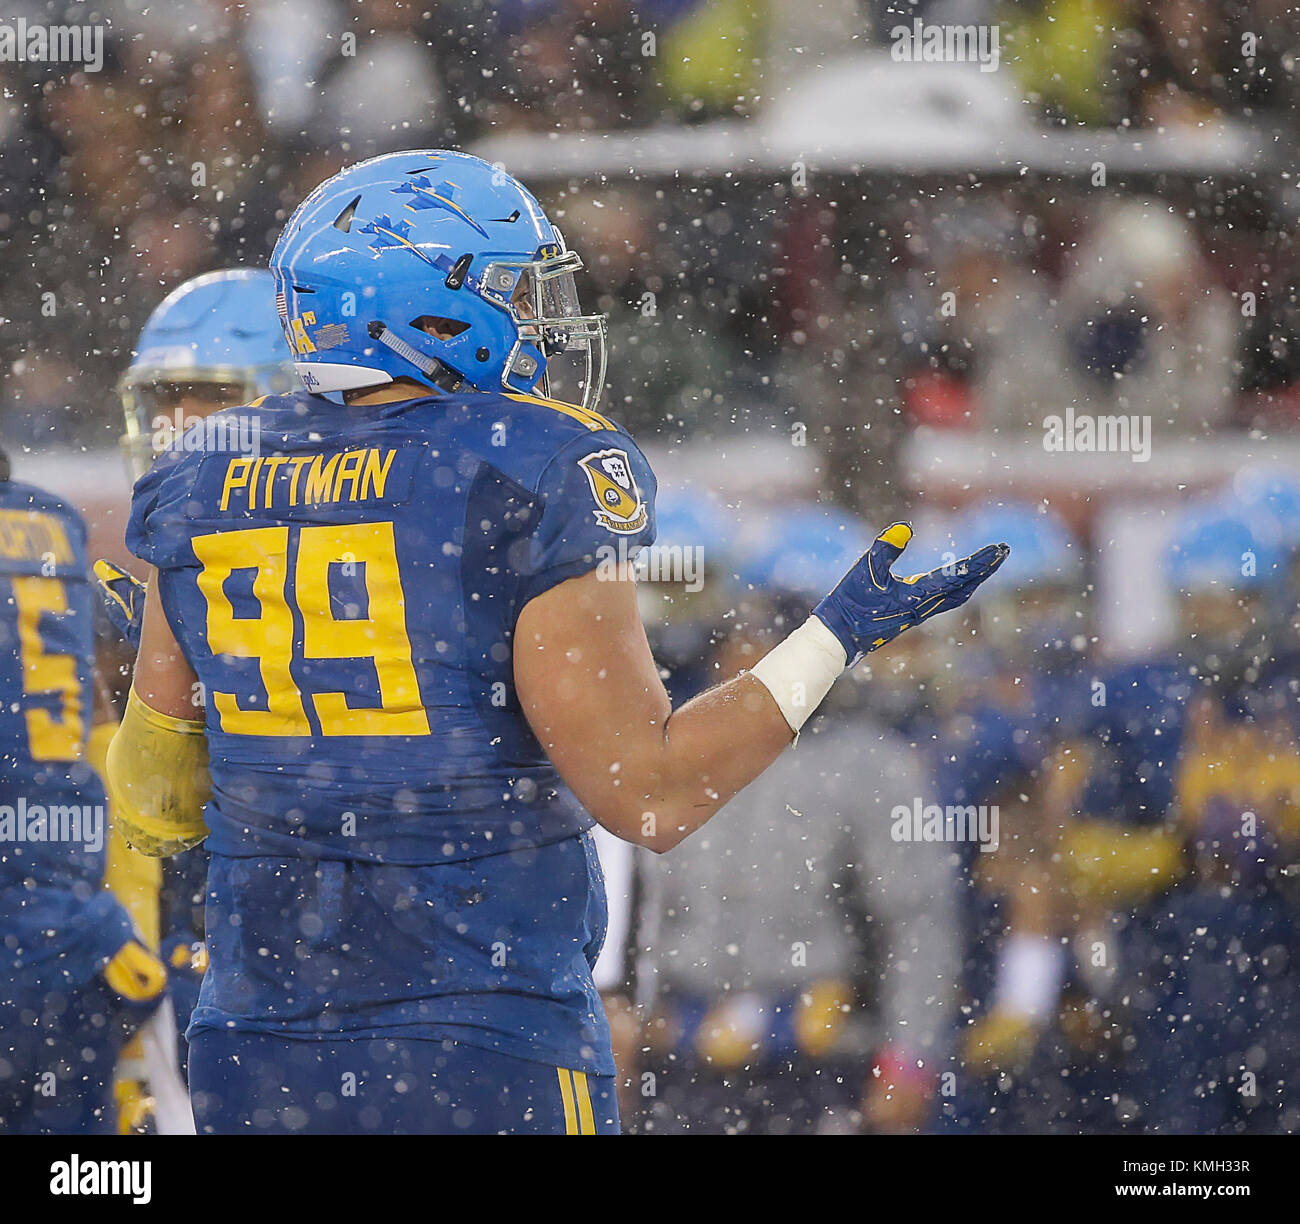 Philadelphia, Pennsylvania, USA. 9th Dec, 2017. Navy NG #99 Jackson Pittman motions to the brigade of midshipmen during the 118th Army Navy game between the United States Naval Academy Midshipmen and the United States Military Academy Cadets at Lincoln Financial Field in Philadelphia, Pennsylvania. Justin Cooper/CSM/Alamy Live News Stock Photo